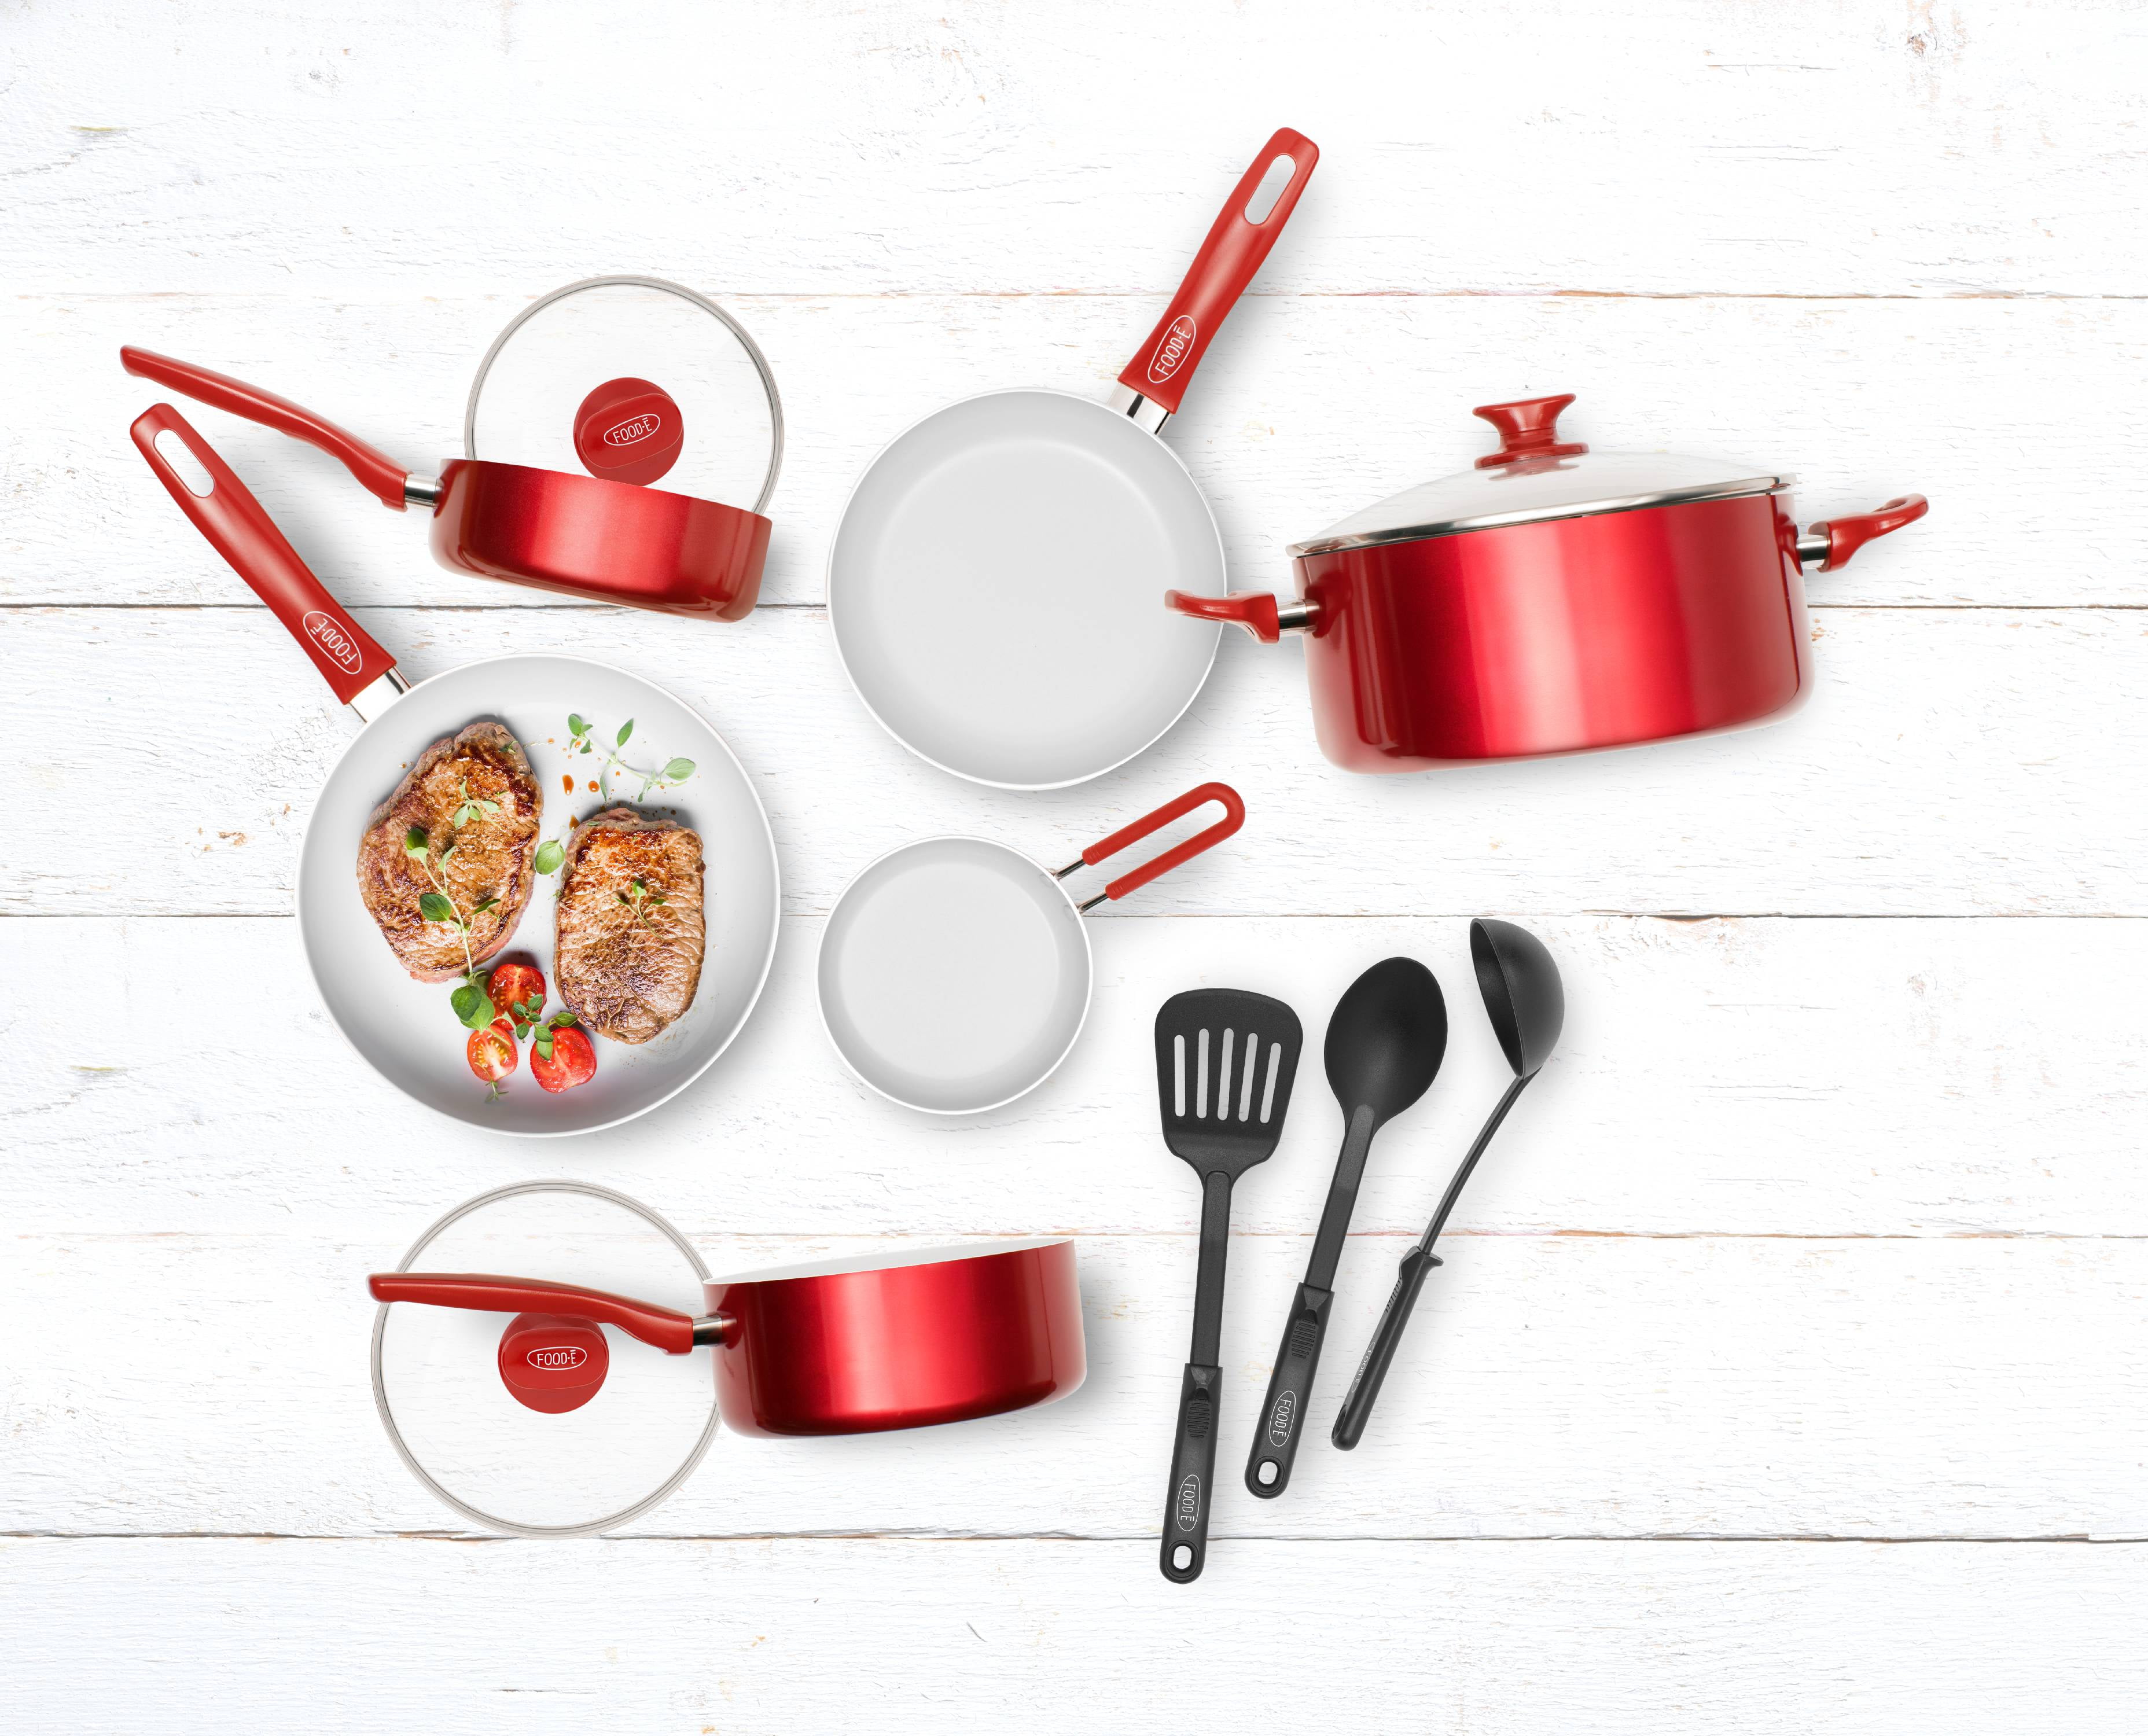 LOWEST PRICE! 😱 Food Network 10-pc. Nonstick Ceramic Cookware Set Only  $39.99 (Reg. $129.99) + FREE SHIPPING! 🔥 🏃 Log in and use: GET10…